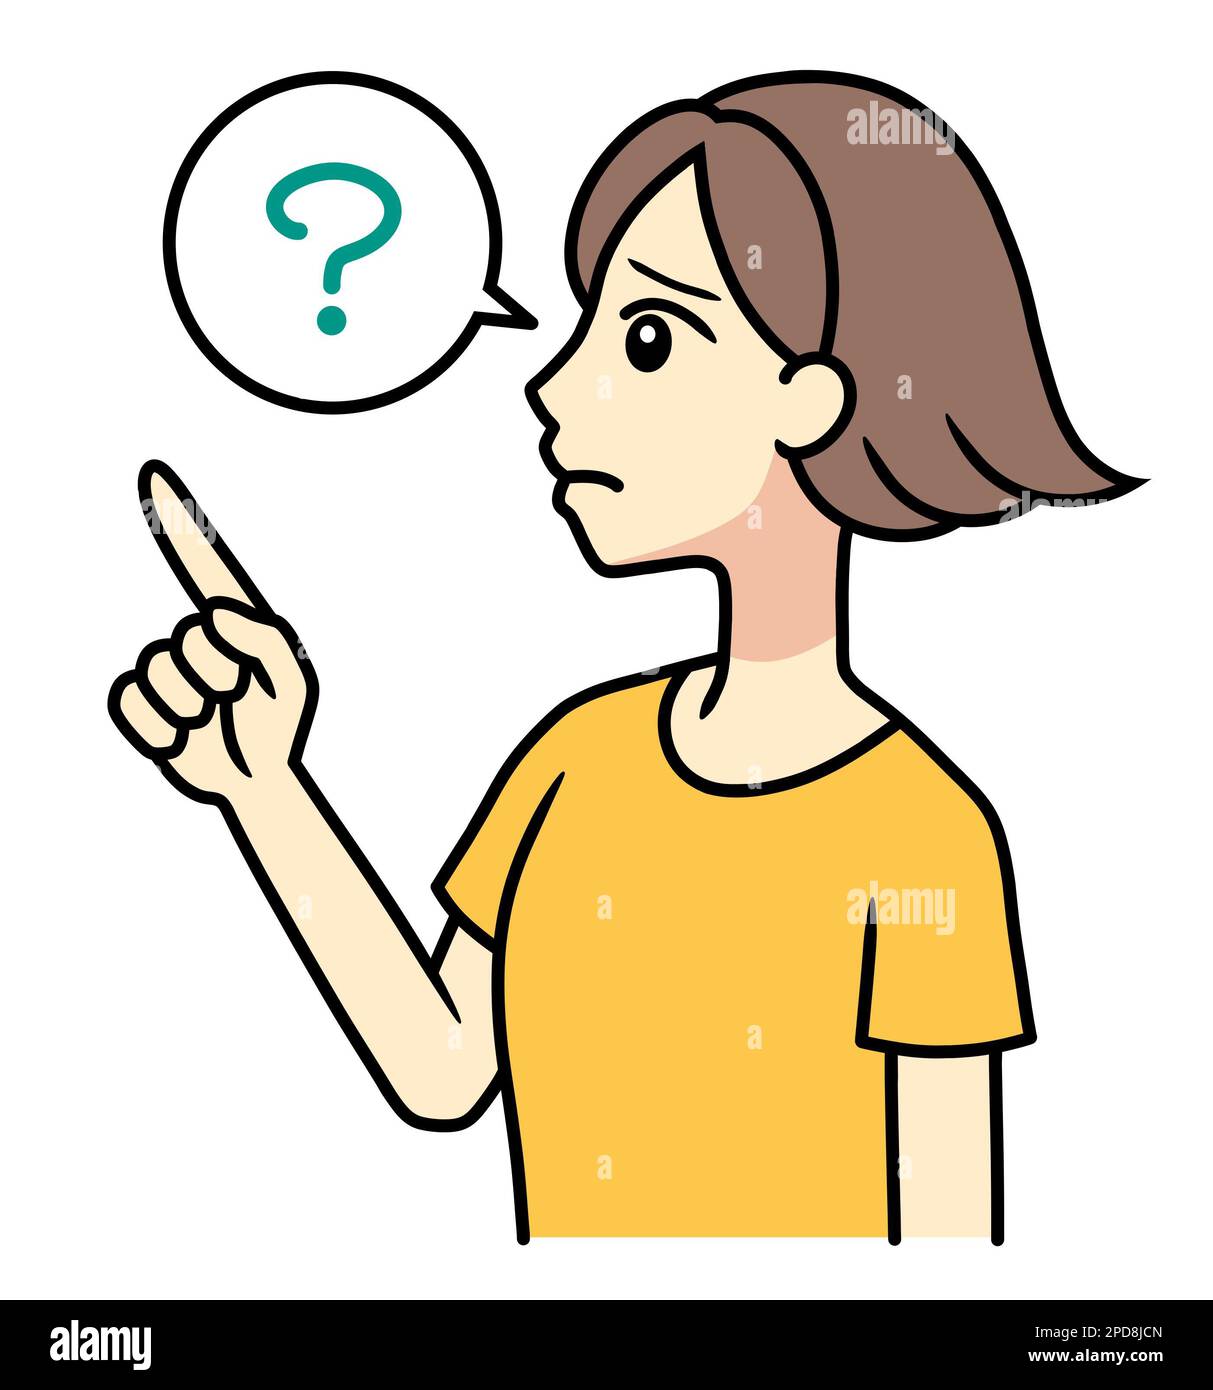 Question Mark Red Stickman White Thinking Asking Stick Figure With  Interrogation Point Ideas Sign 3d Rendering Stock Photo - Download Image  Now - iStock